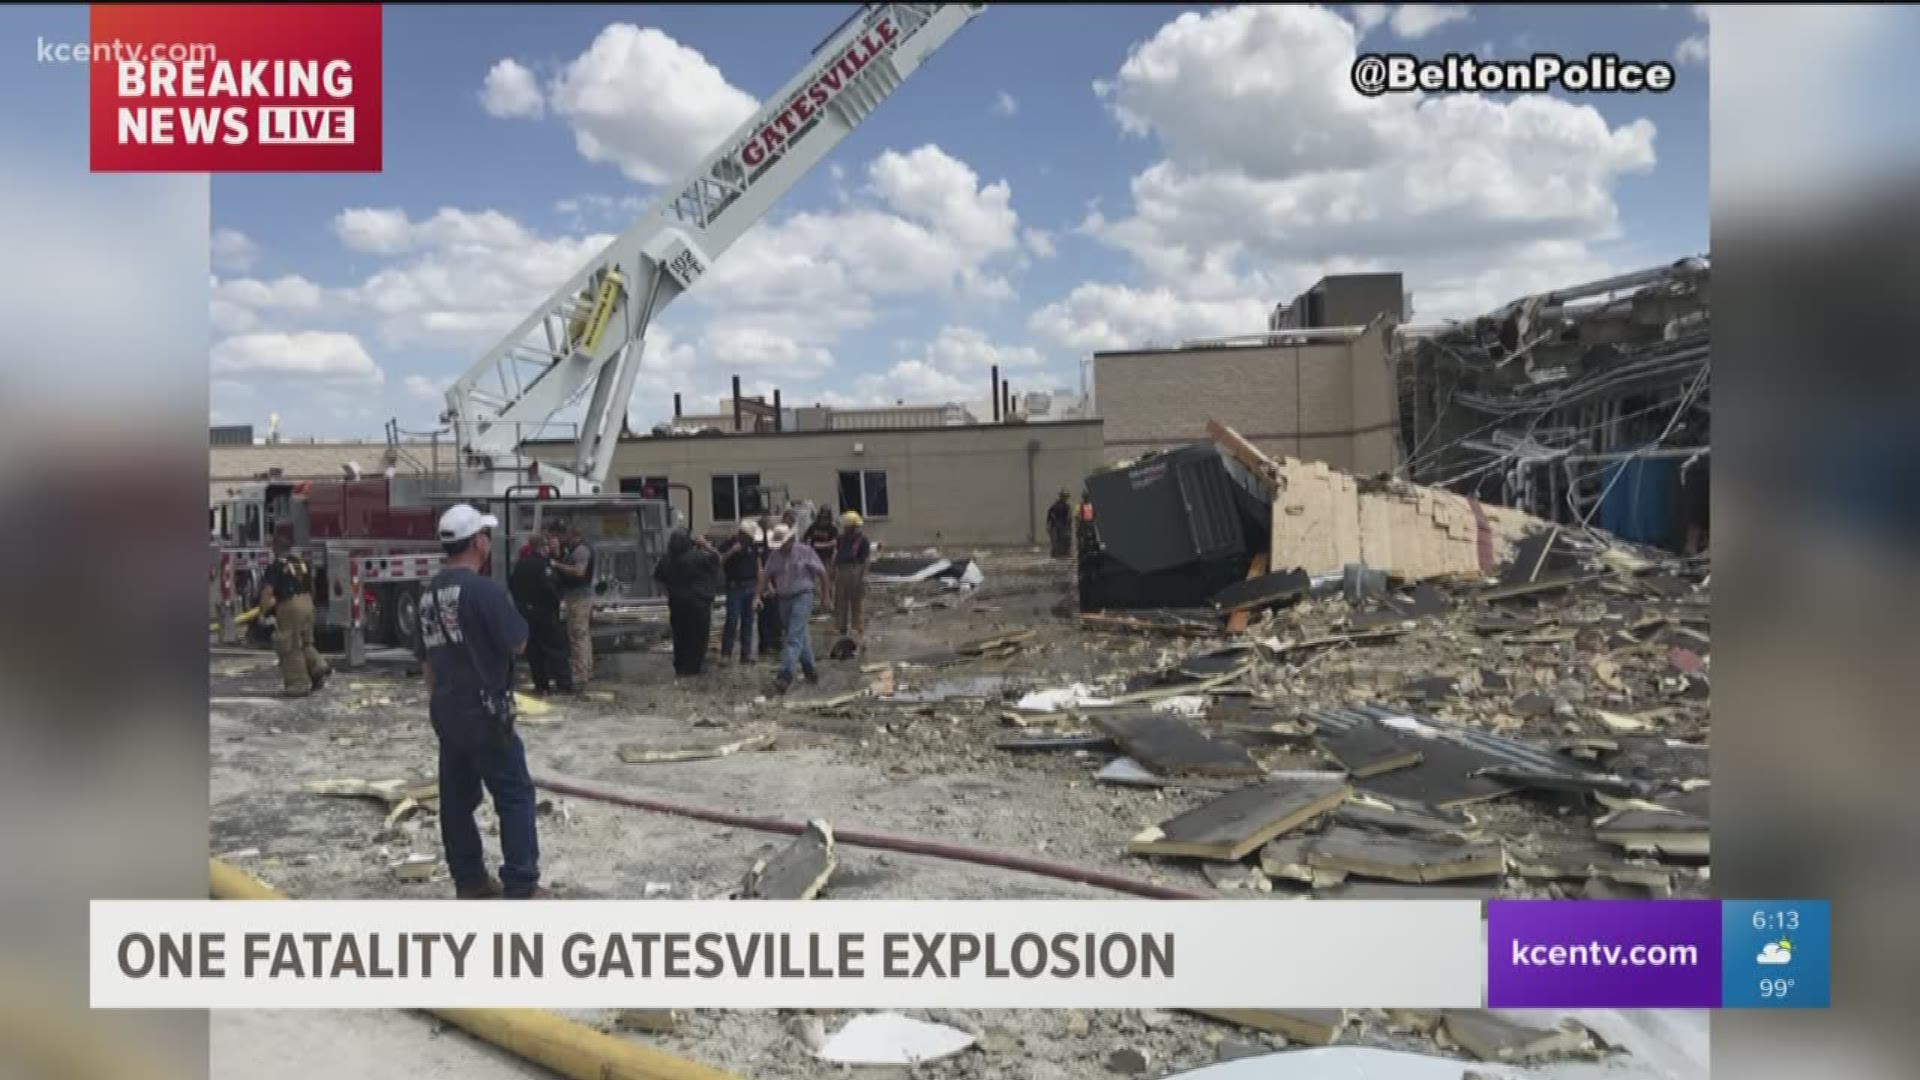 Photos from the scene show the serious damage following a deadly explosion in a construction area at Coryell Memorial Hospital in Gatesville, Texas.